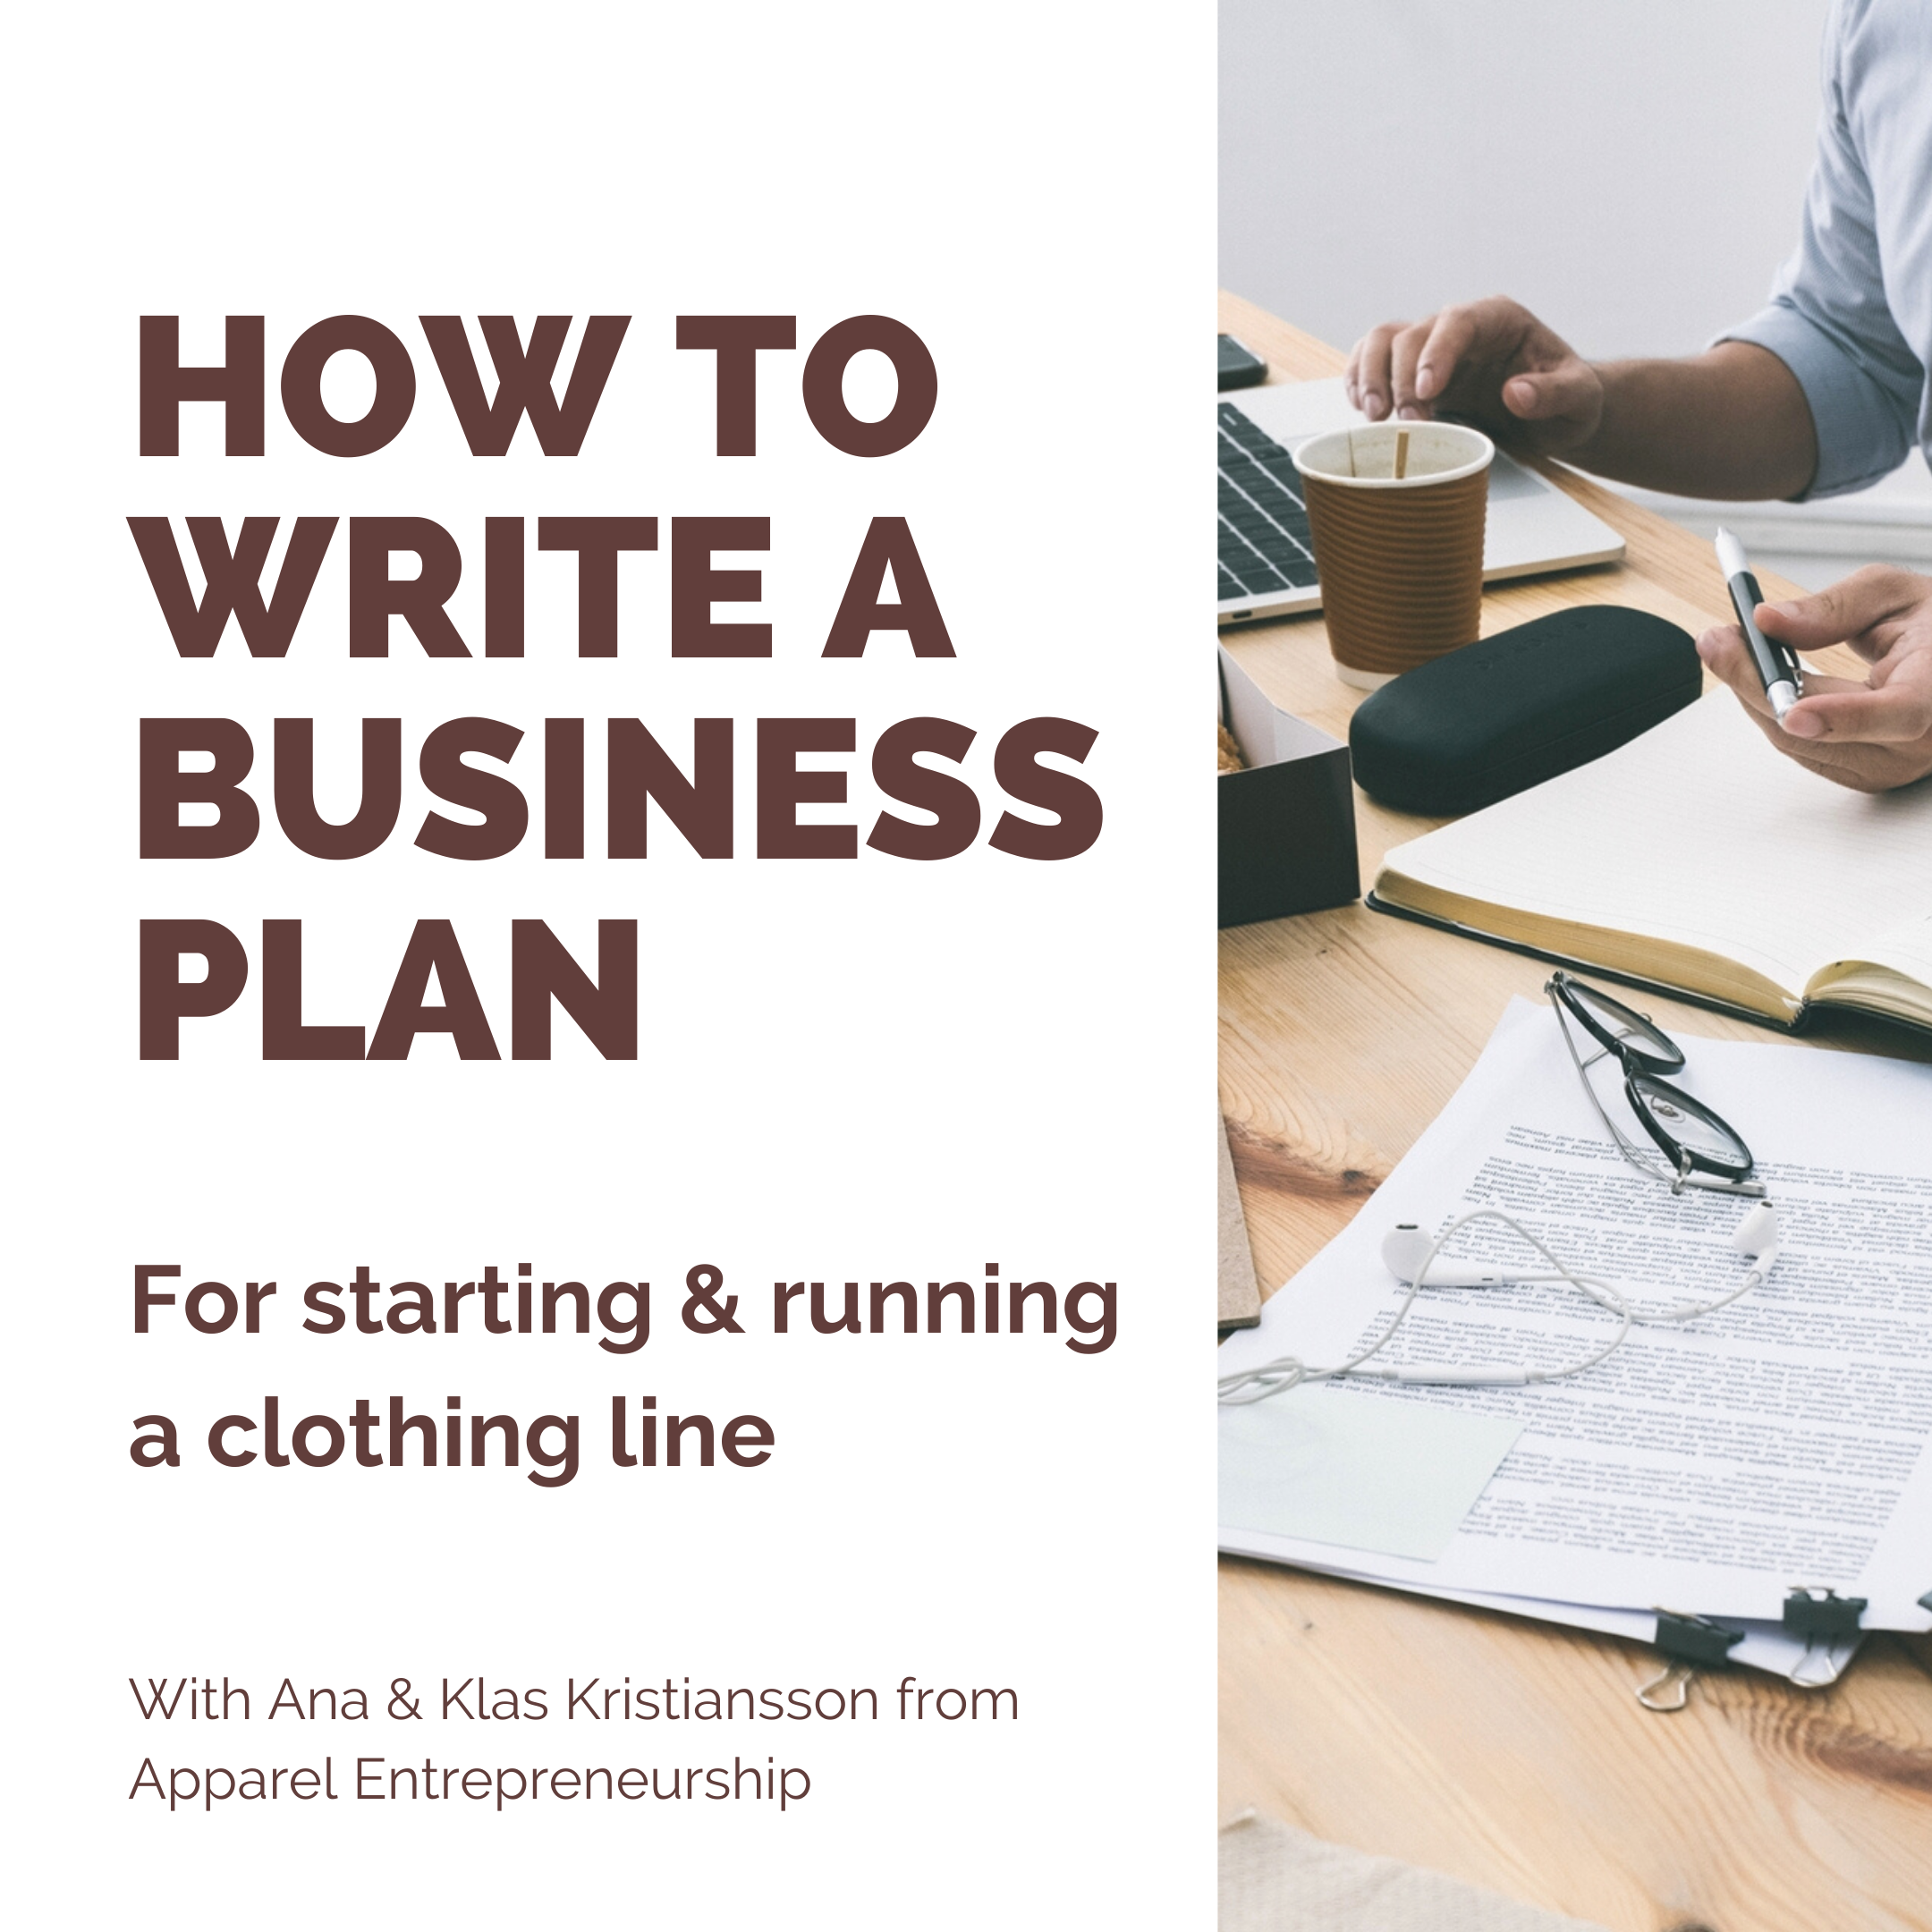 How To Write A Business Plan Workshop